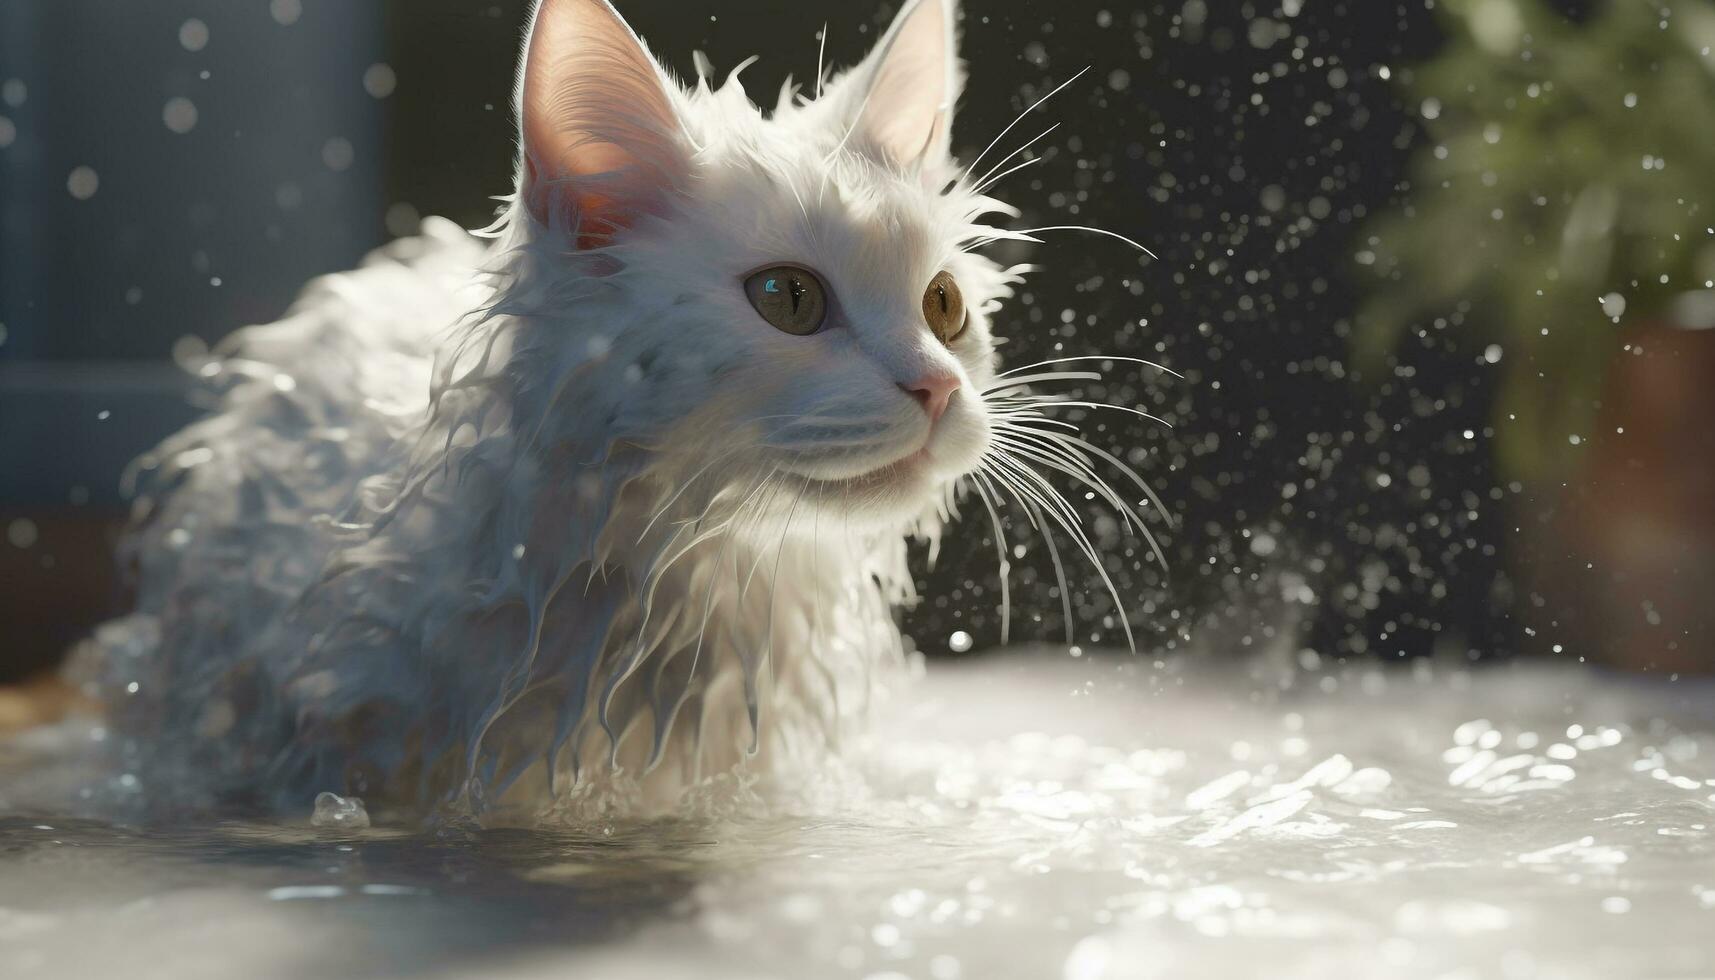 Cute kitten playing in the snow, staring with curious eyes generated by AI photo